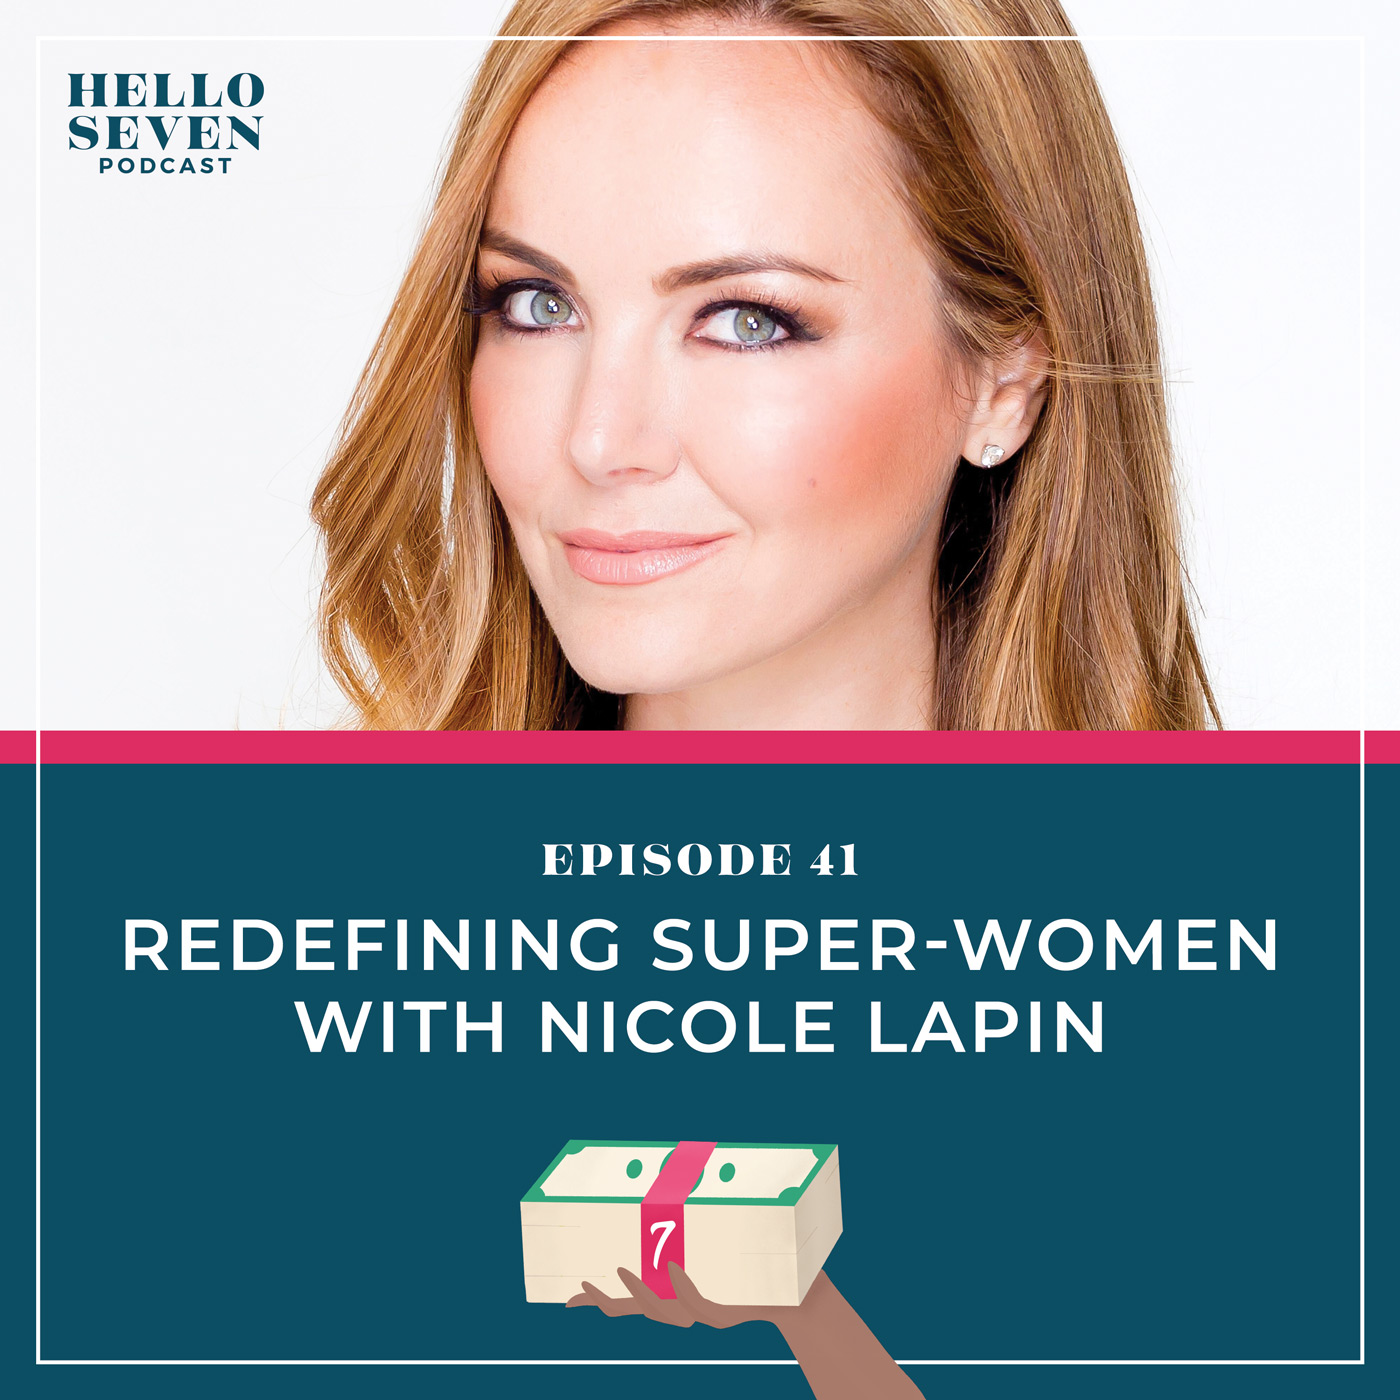 Redefining Super-Women with Nicole Lapin